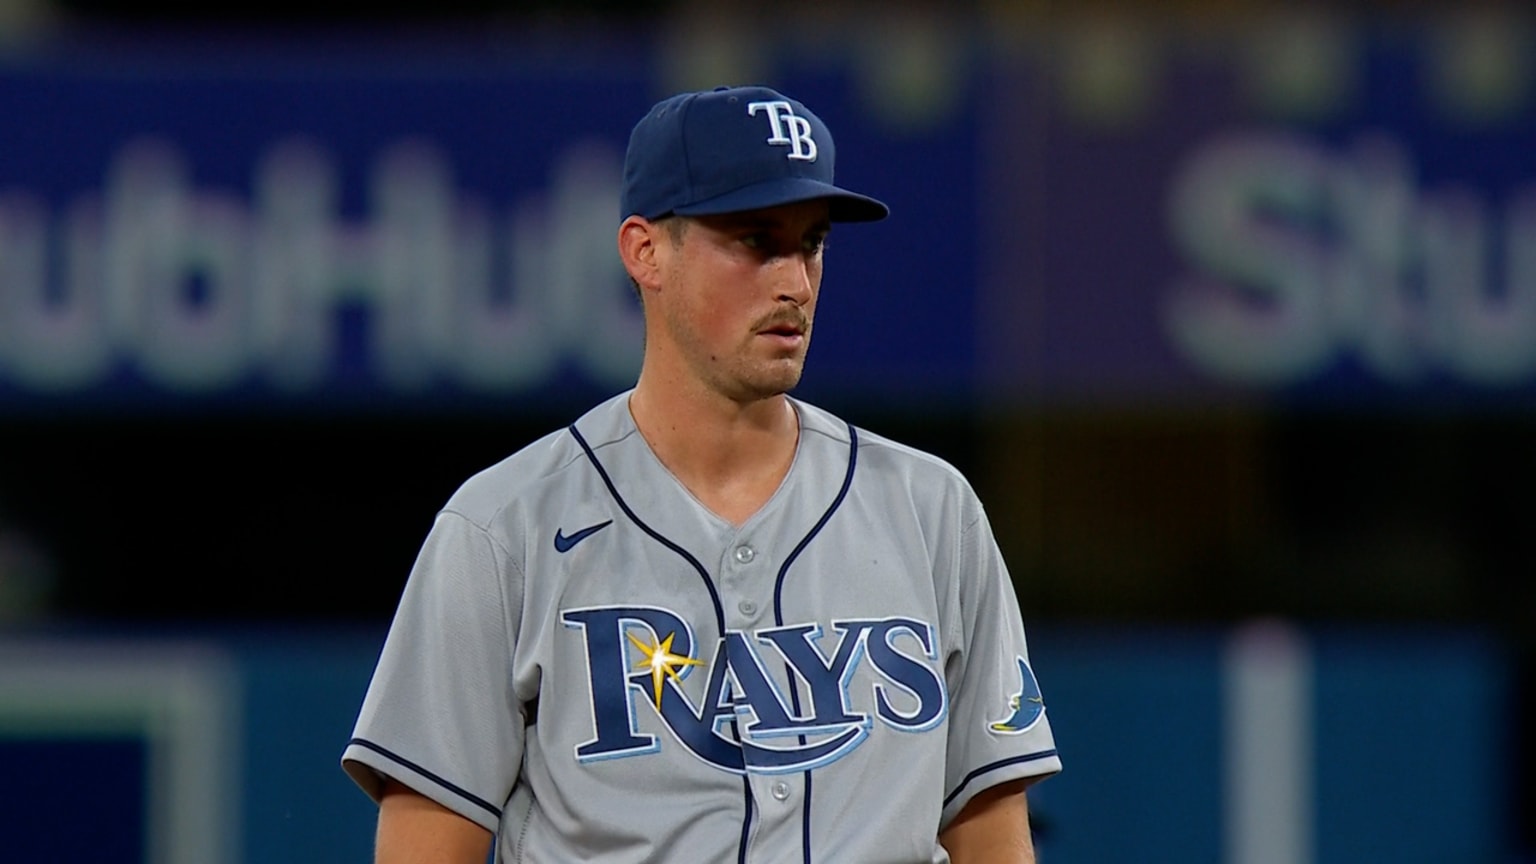 Cooper Criswell's solid start 09/12/2022 Tampa Bay Rays